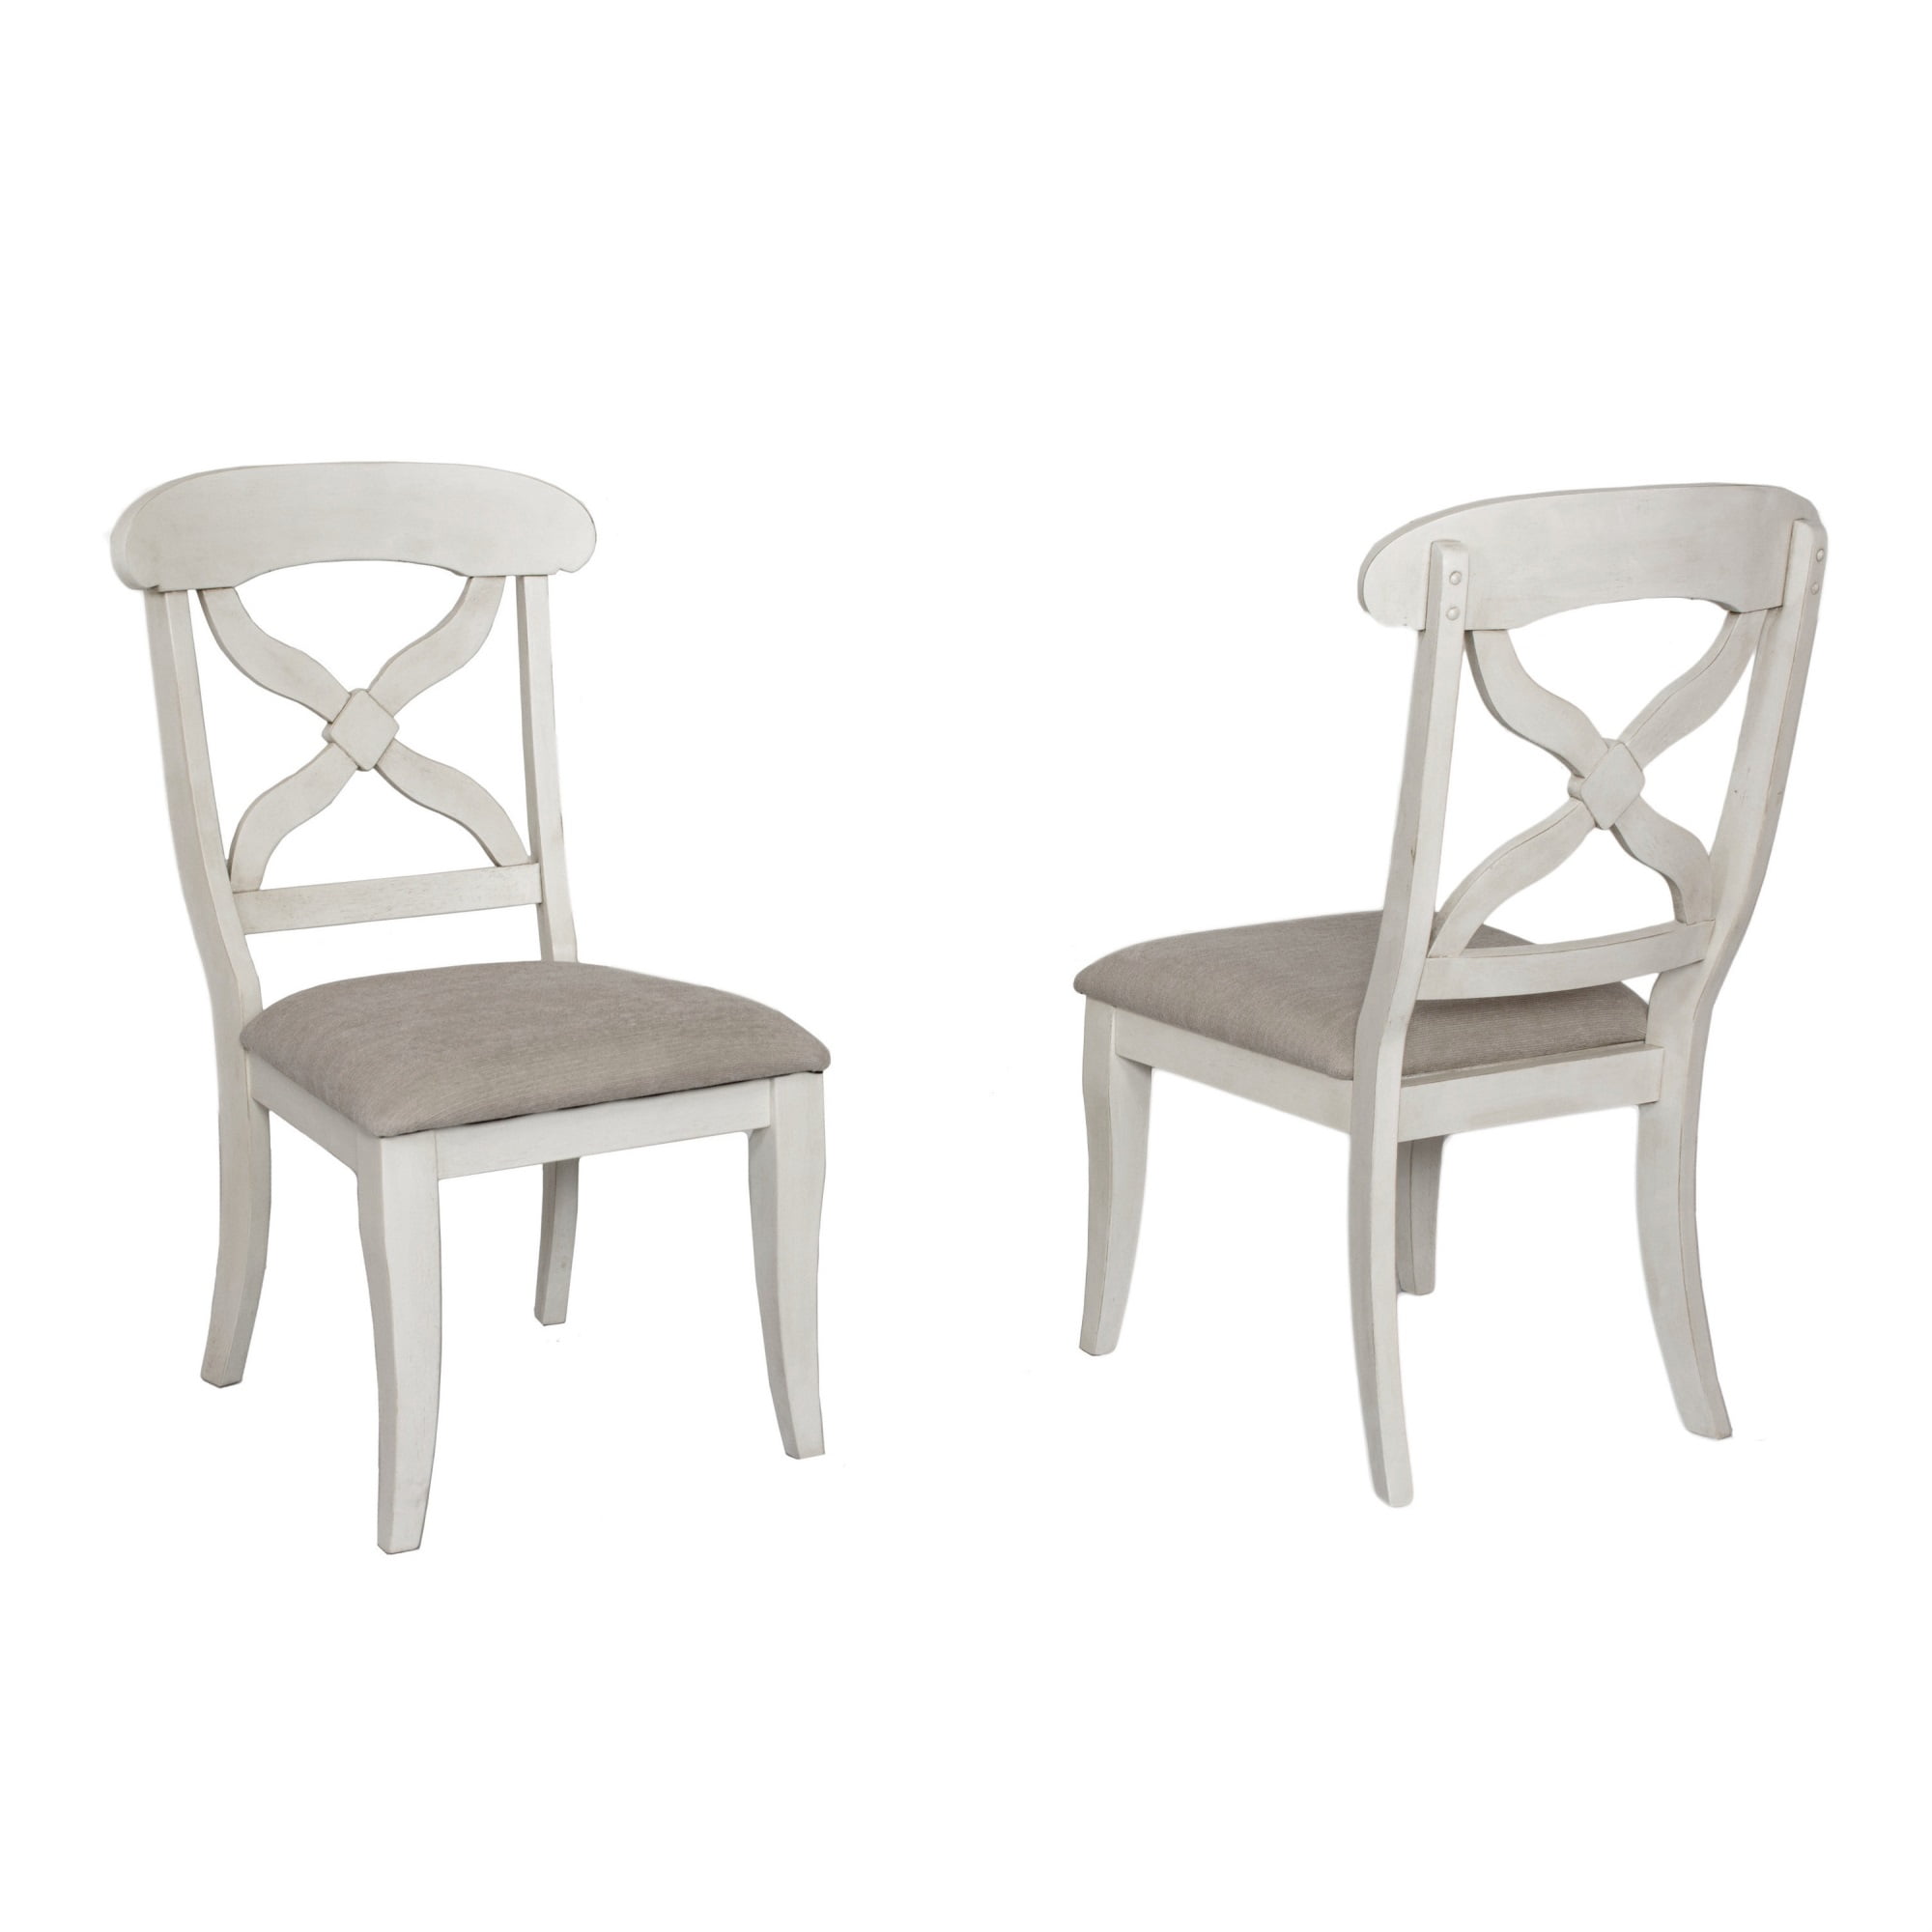 Sunset Trading Andrews Dining Chair Antique white finish 